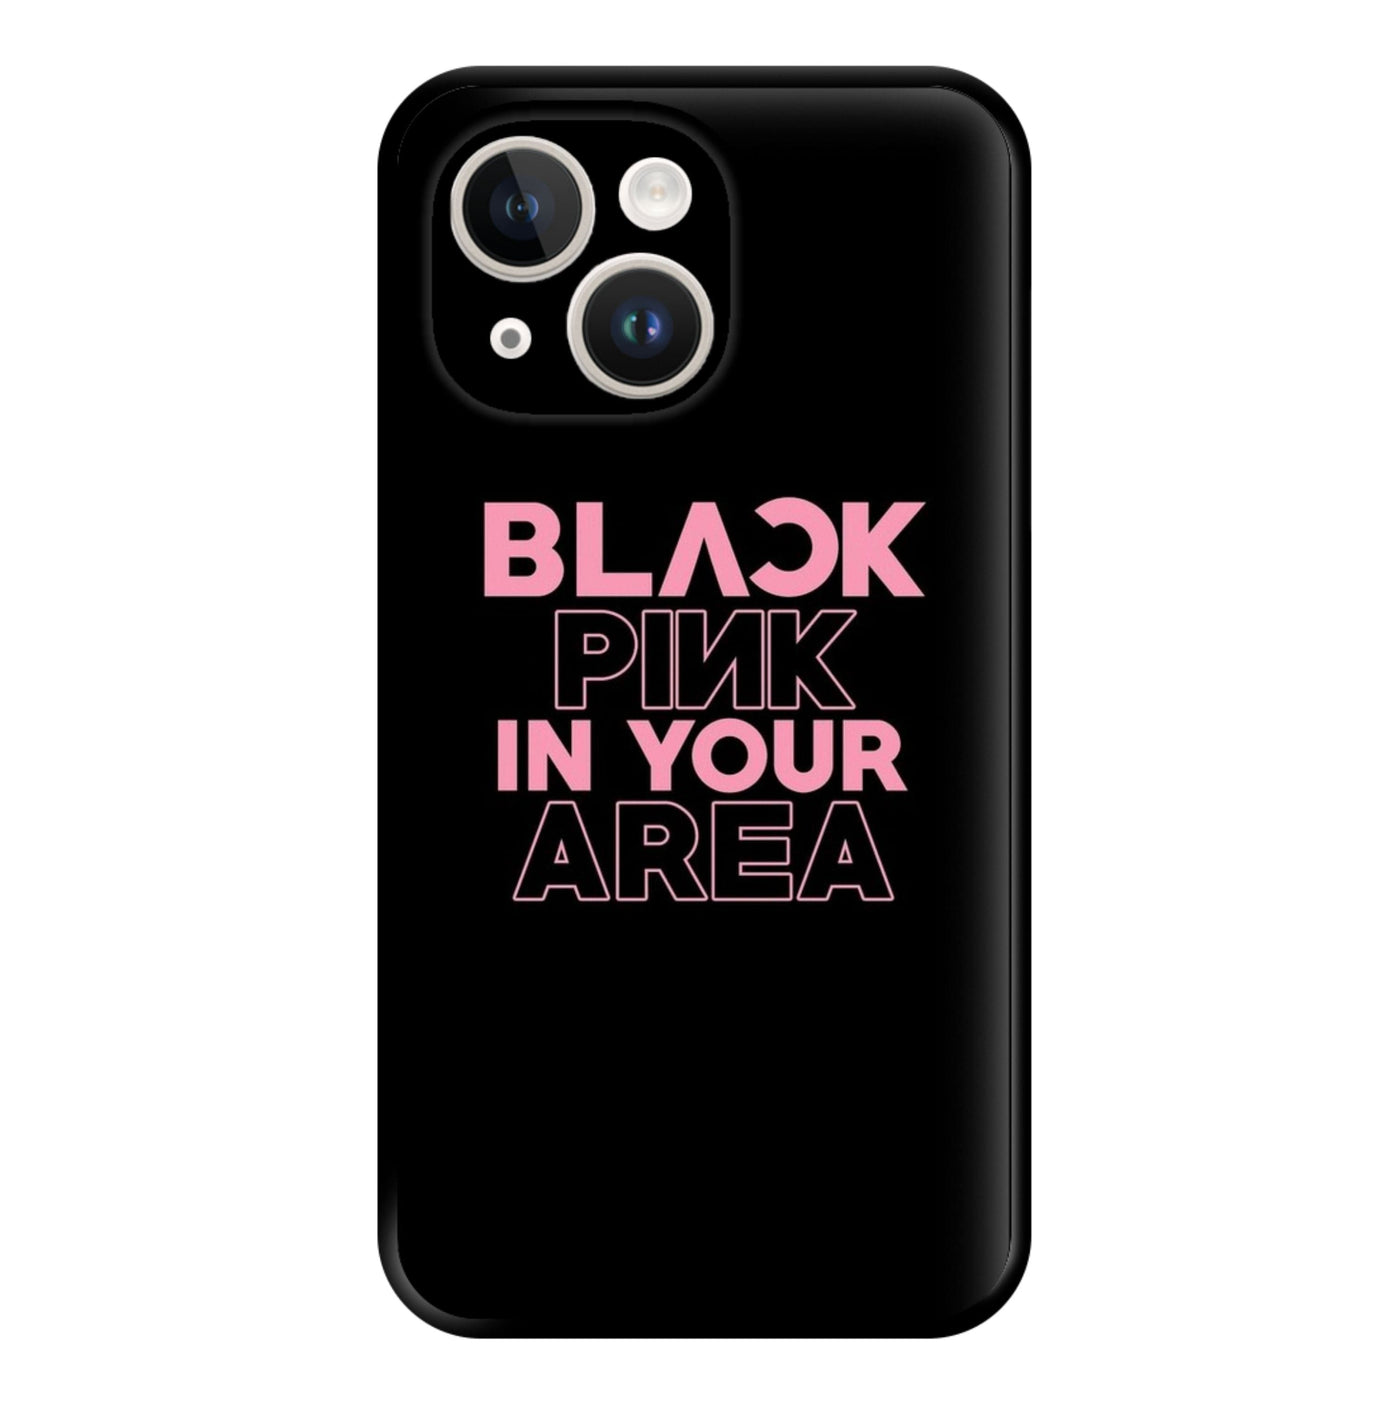 Blackpink In Your Area - Black Phone Case